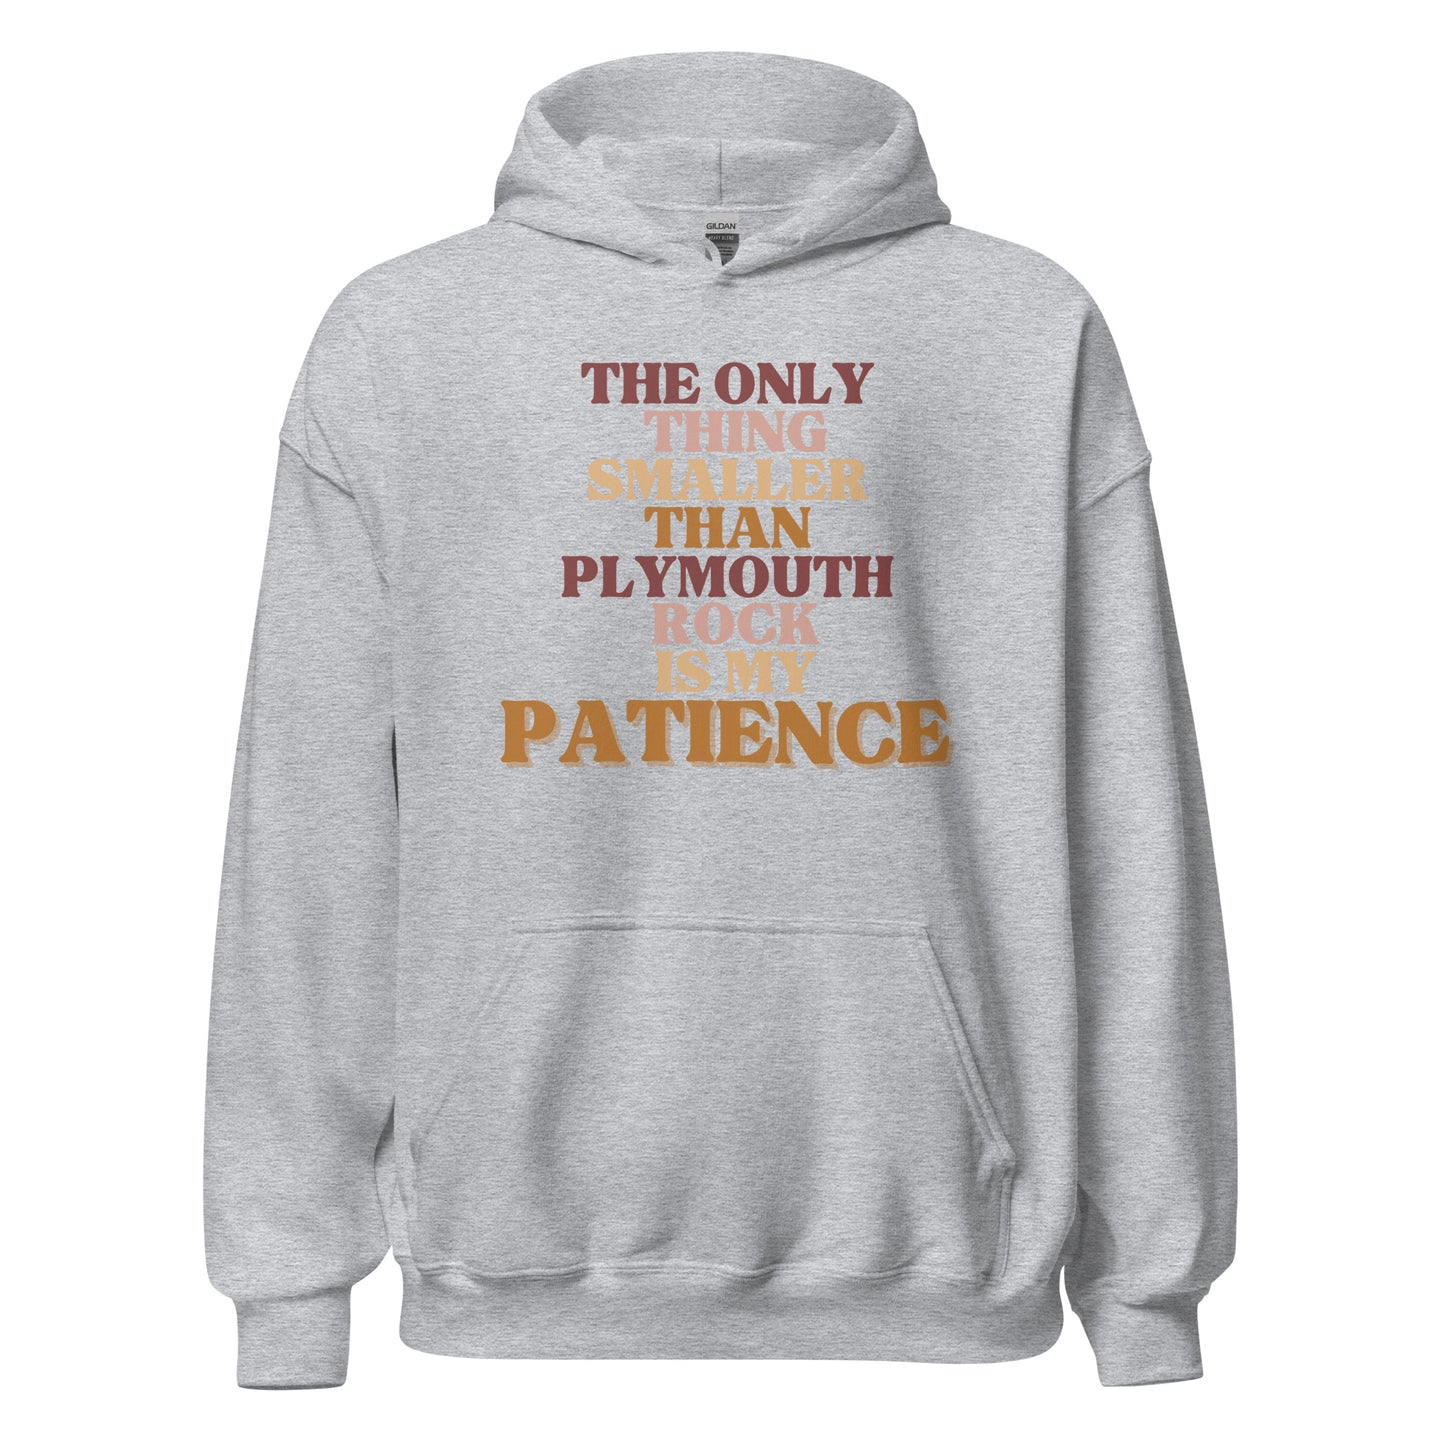 Plymouth Rock Patience Hoodie